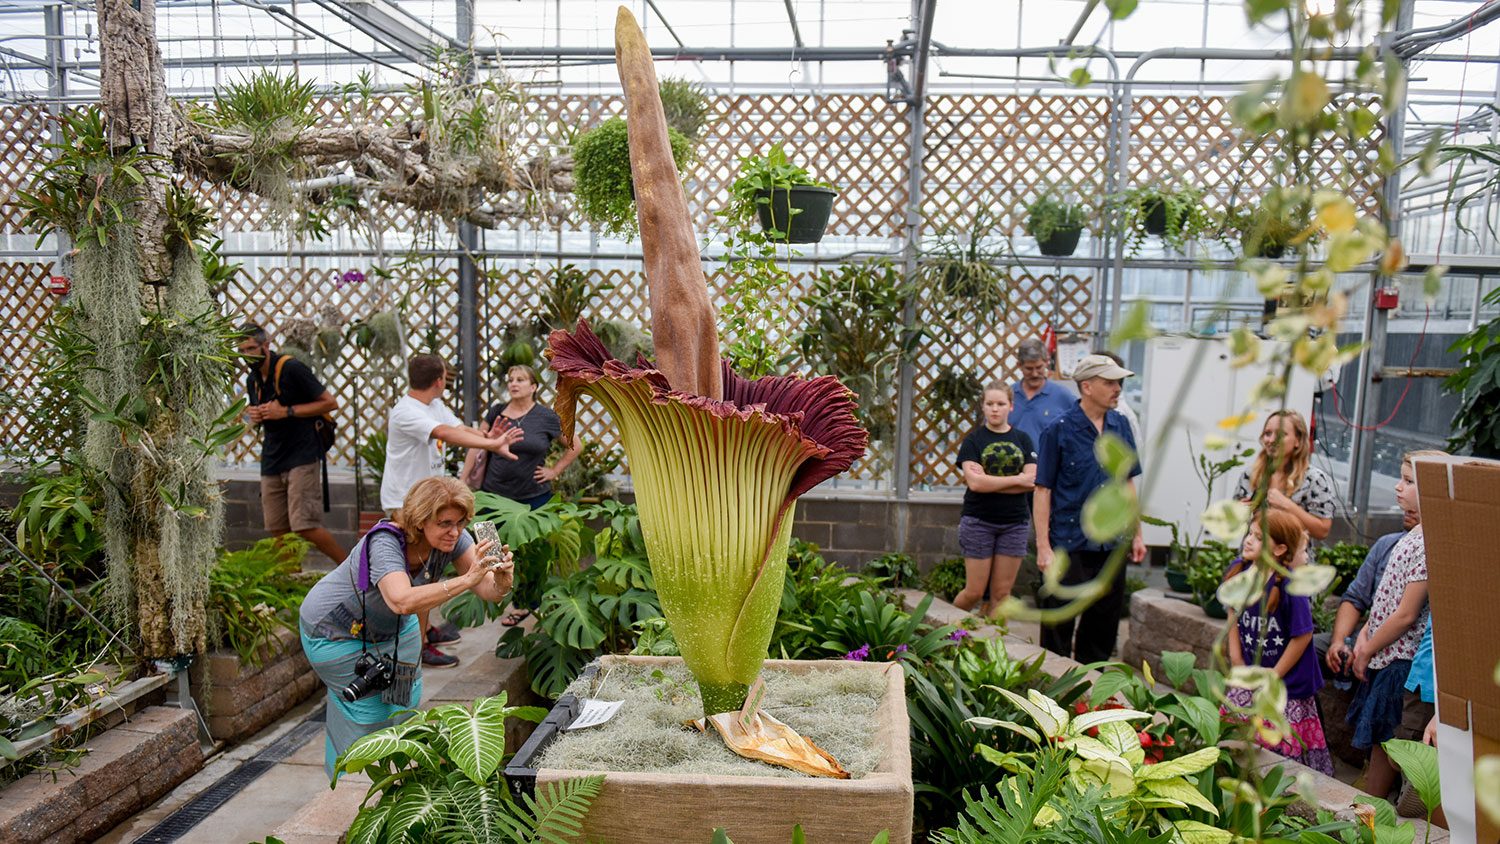 NC State corpse flower in bloom